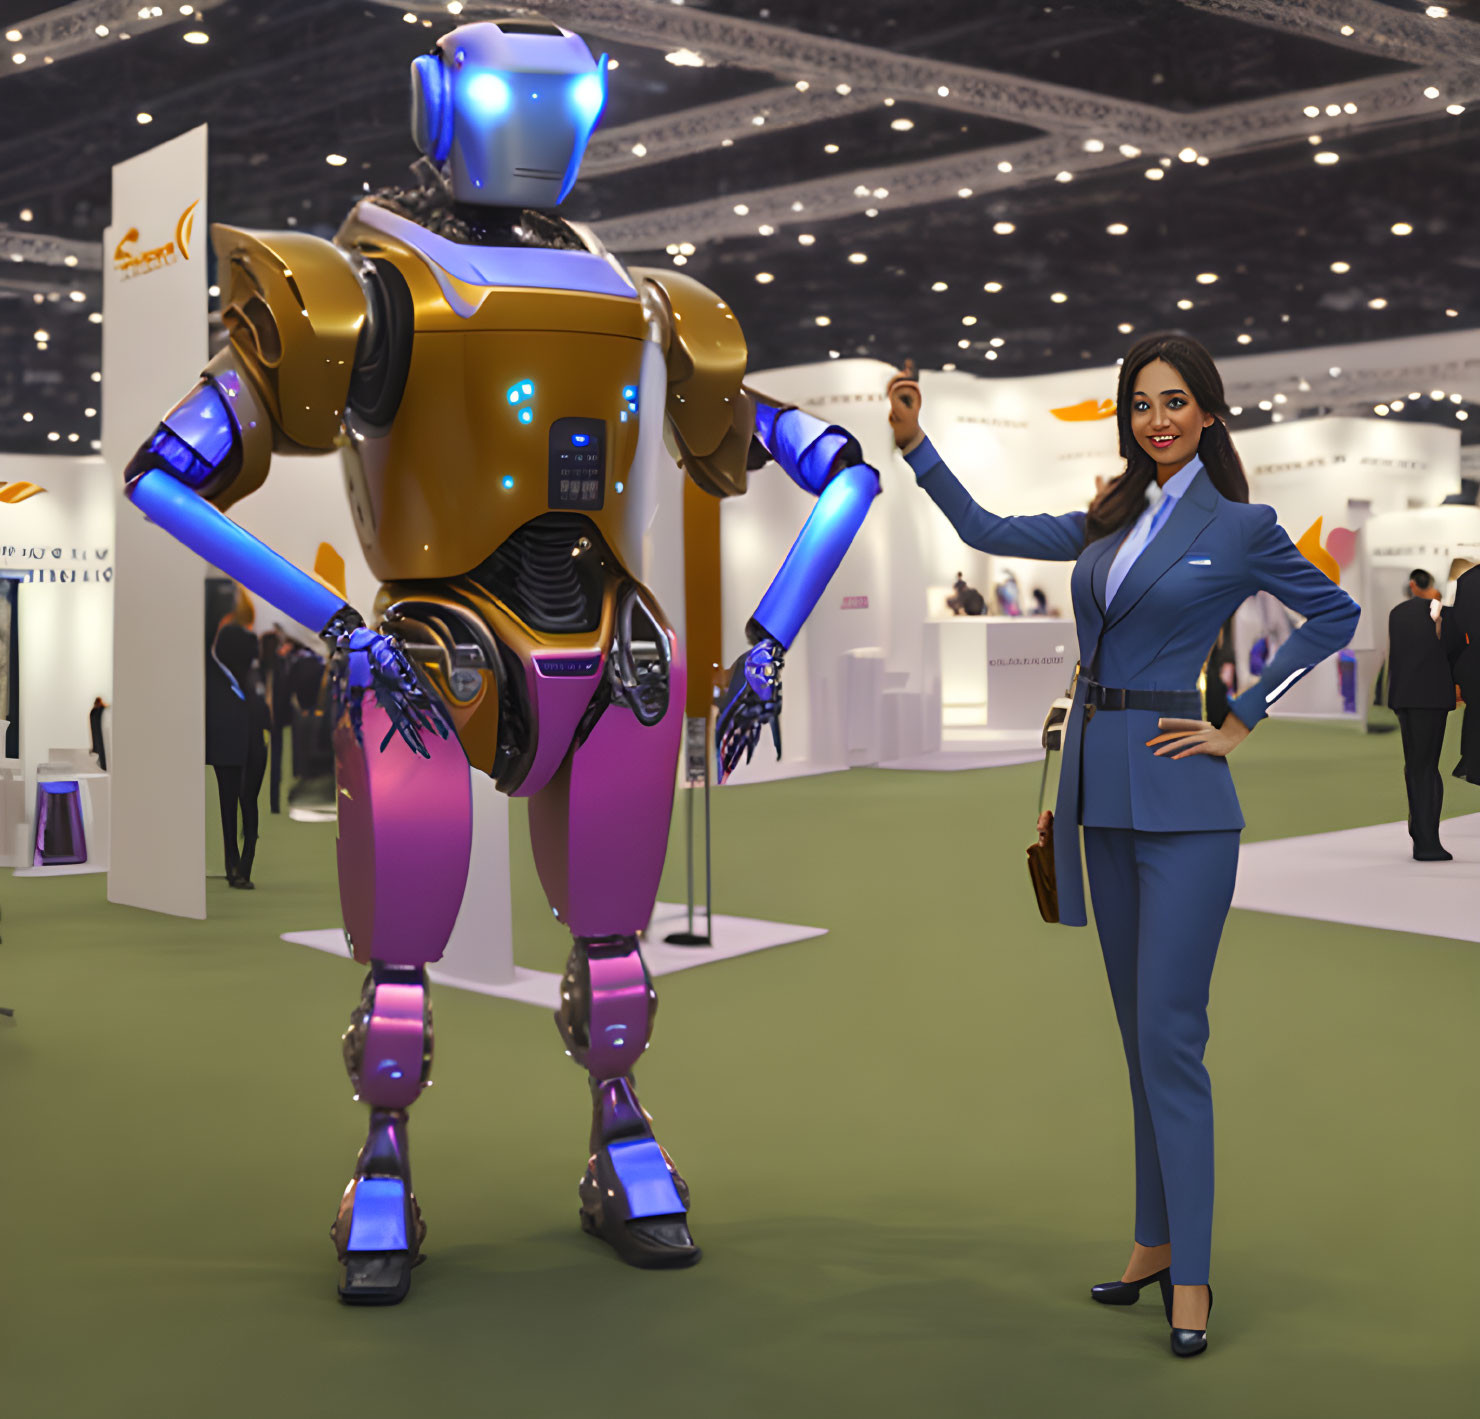 Gold and Purple Accented Humanoid Robot with Smiling Woman in Blue Suit at Technology Expo